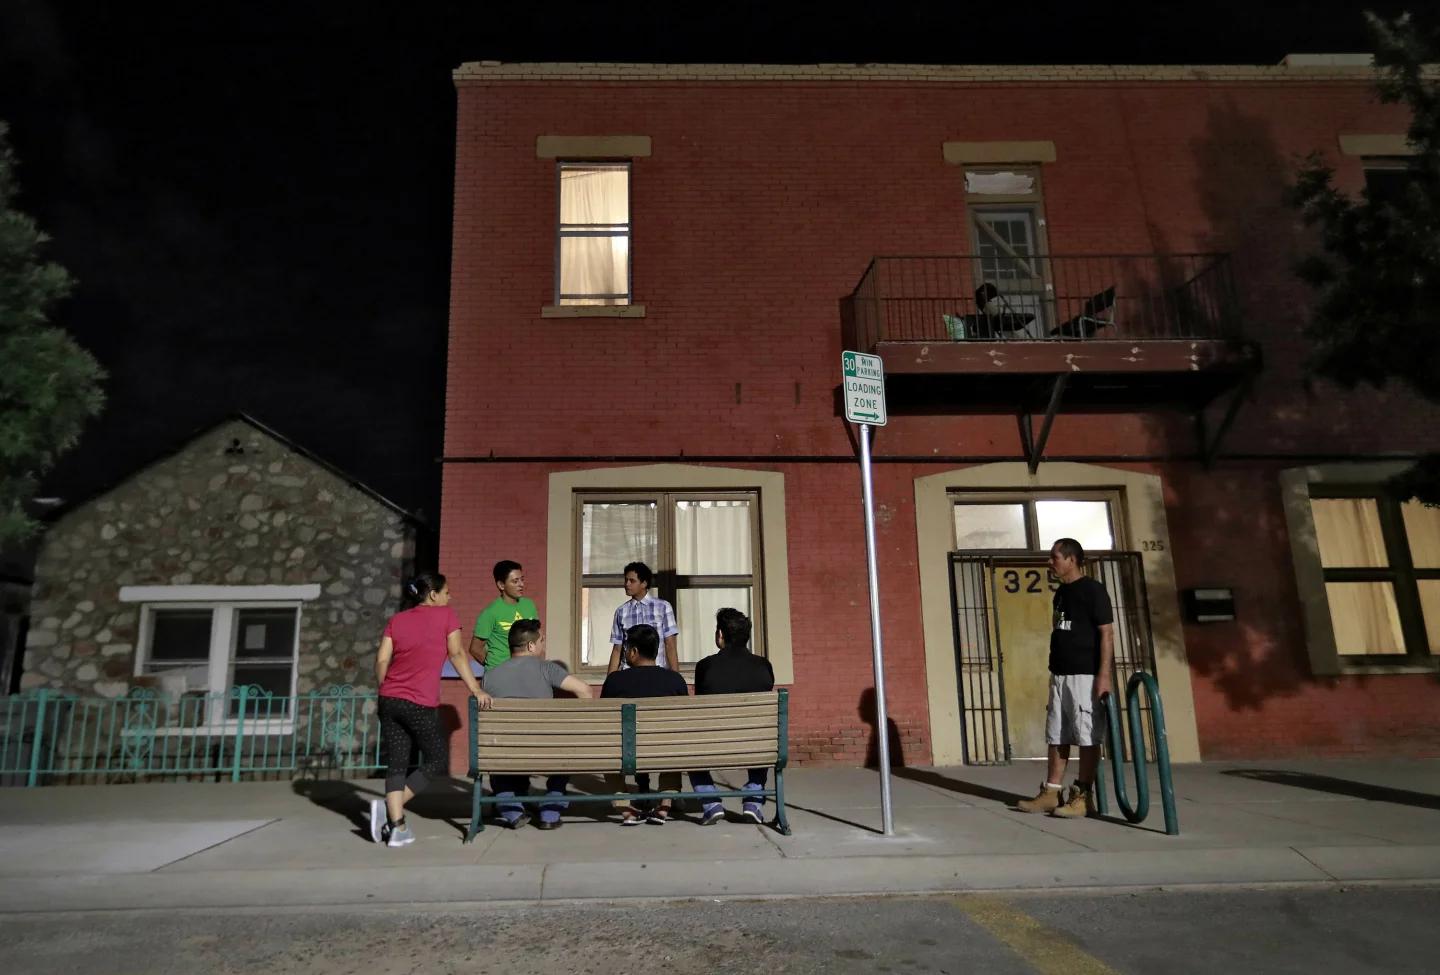 Texas effort to shut down Catholic migrant shelter ‘unfounded’